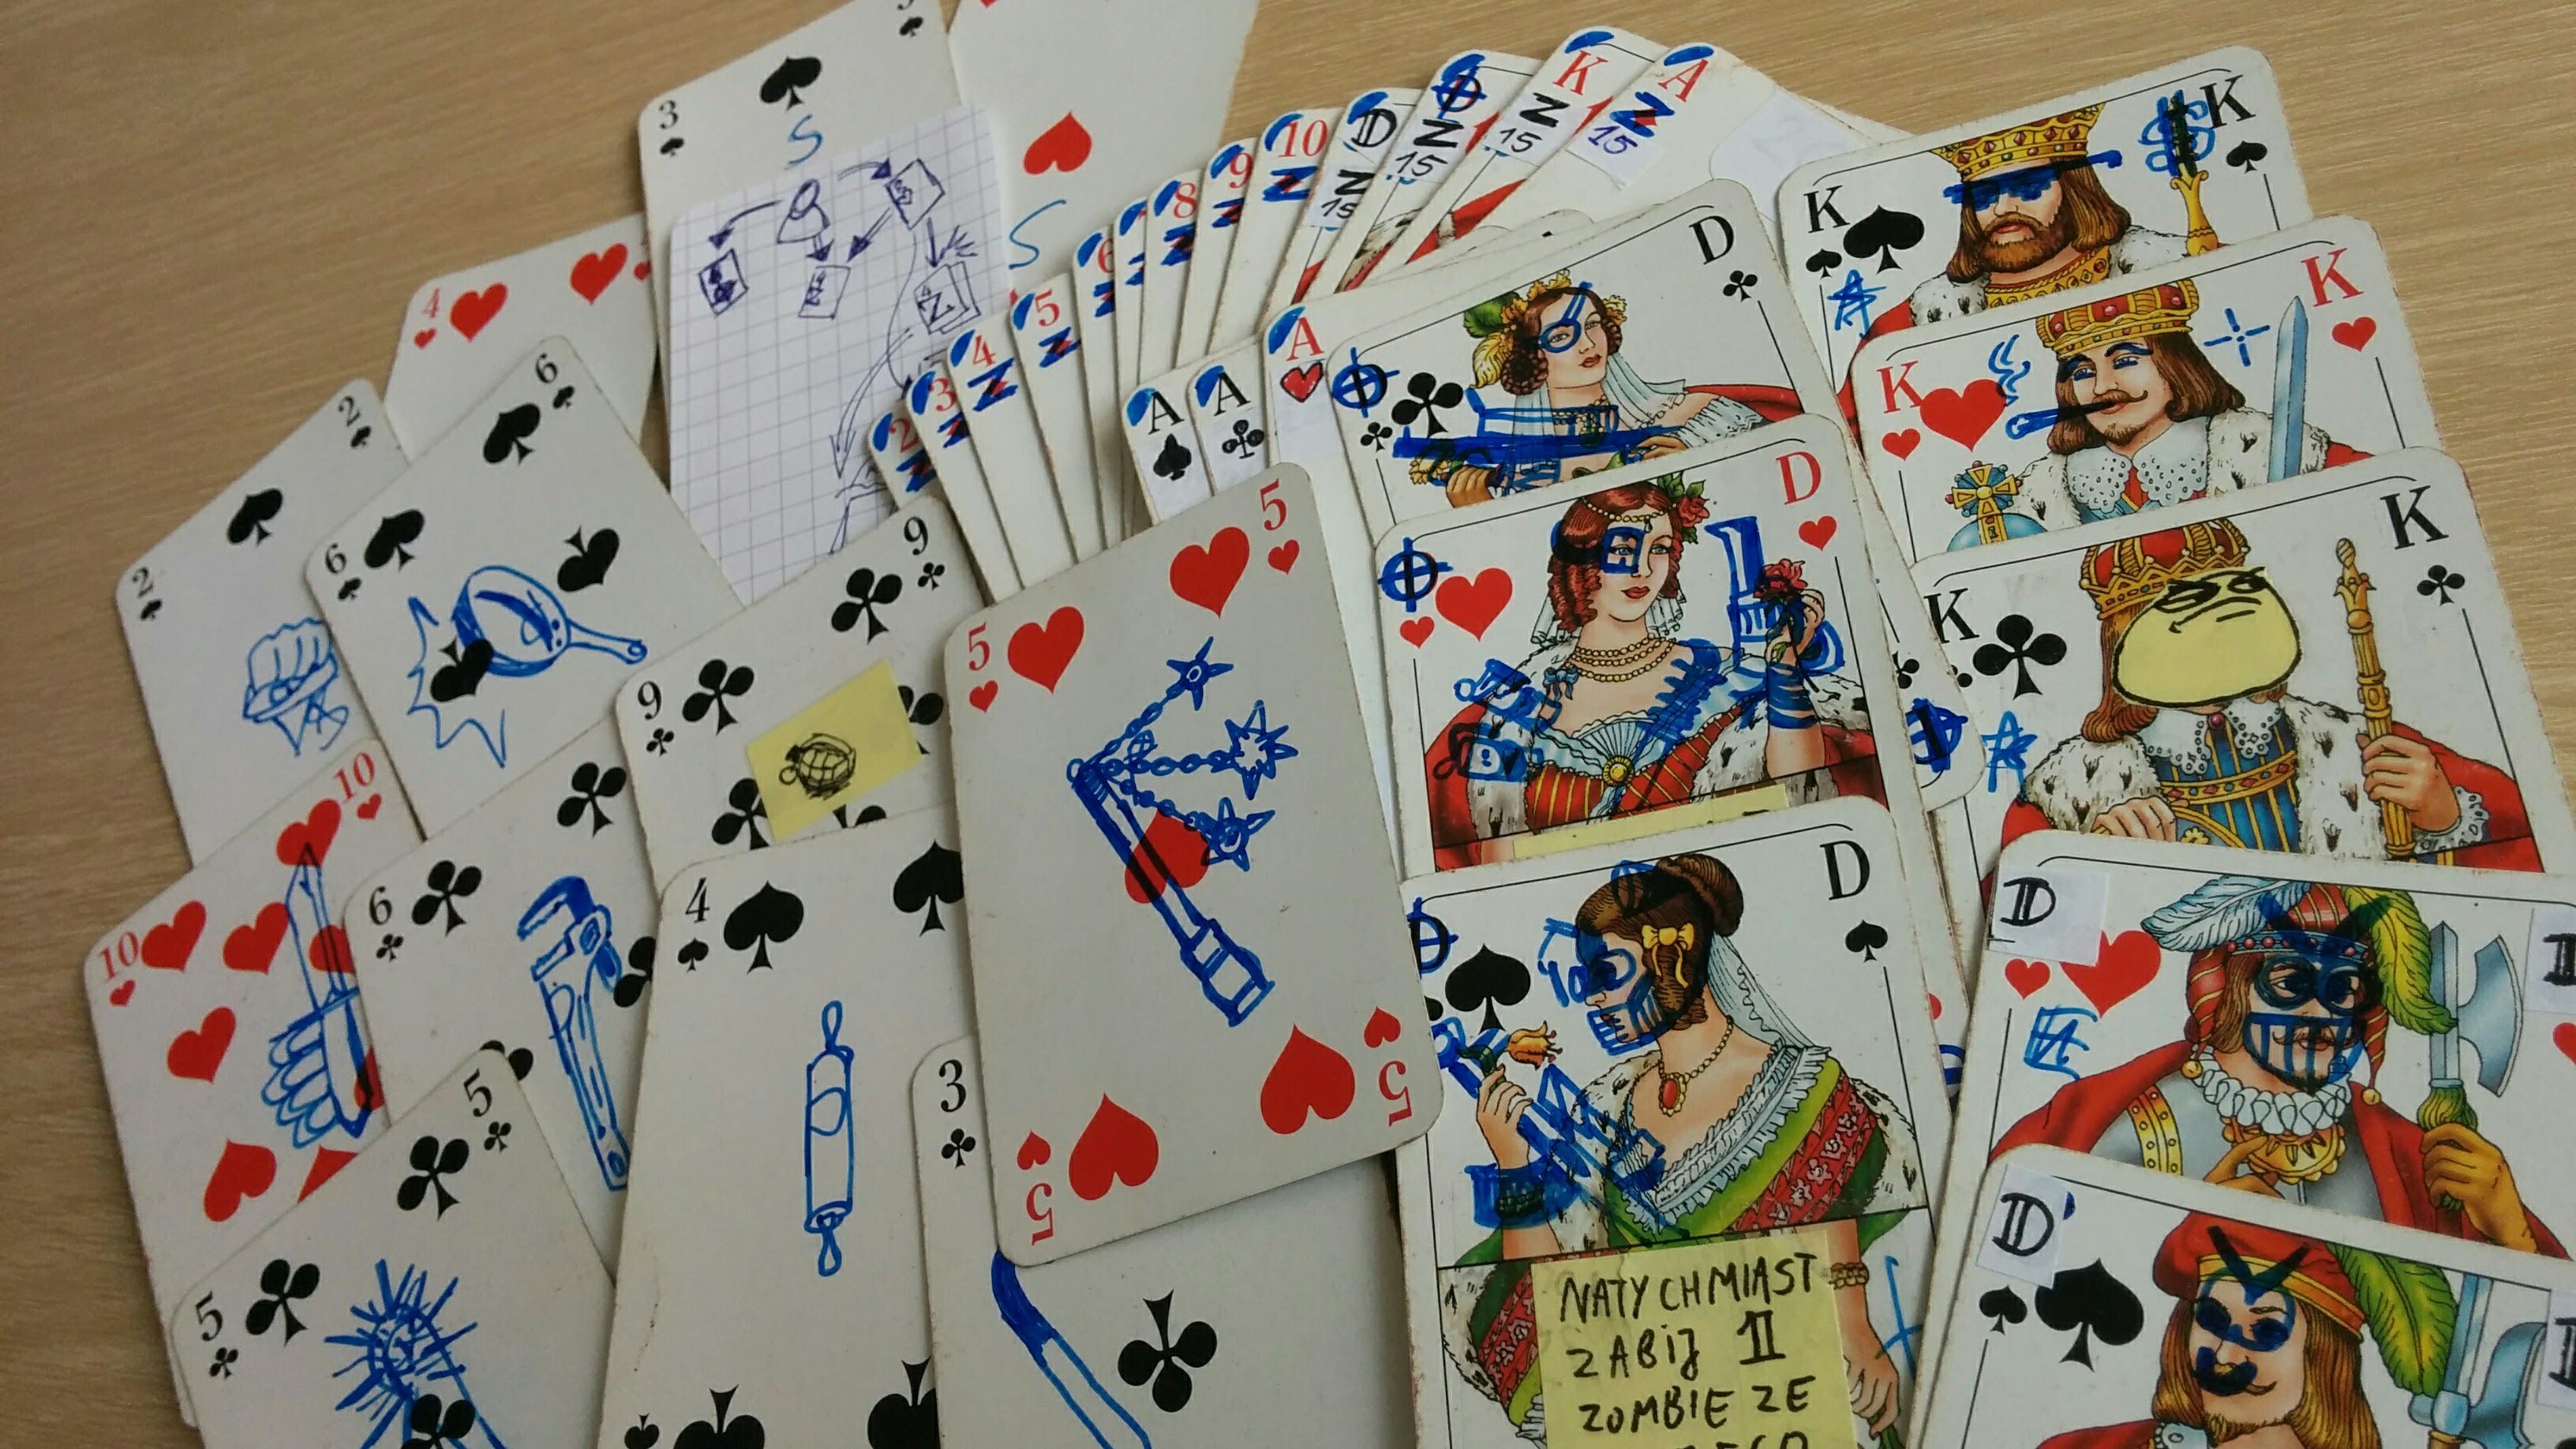 Basic playing cards with extra pen drawings on them